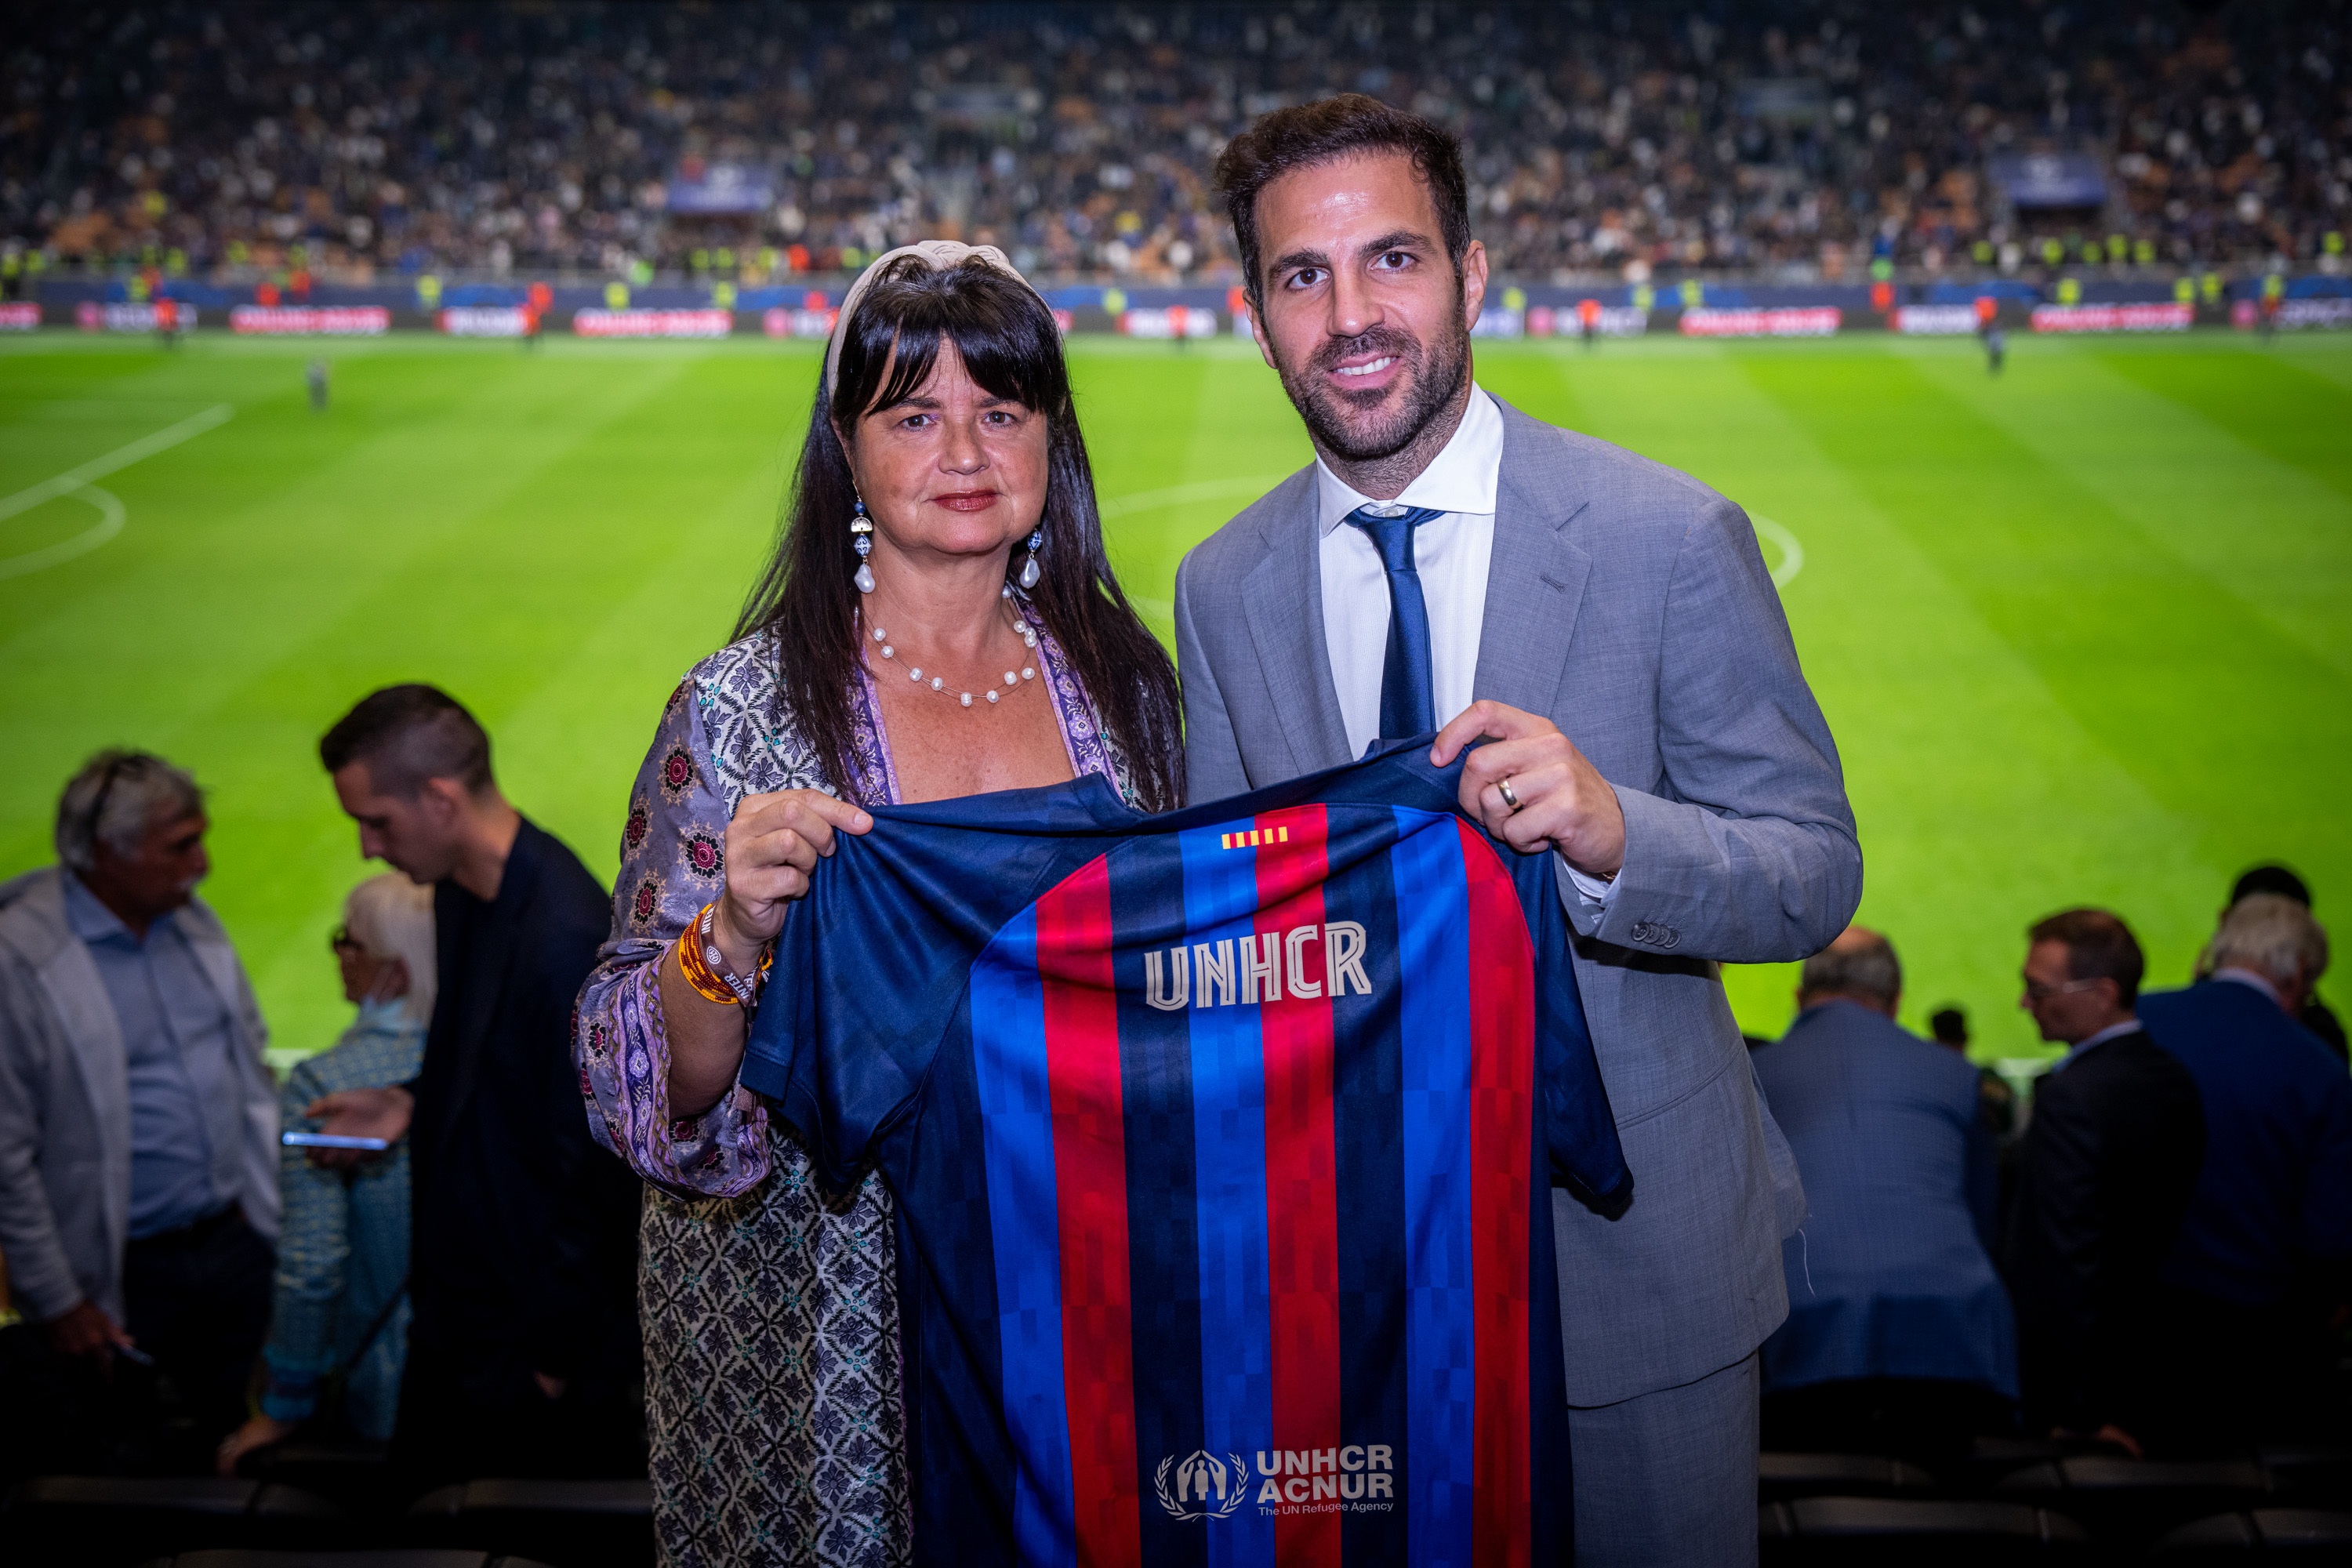 Former player Cesc Fabregas supports the OHCHR/ACNUR alliance with FC Barcelona and Fundación